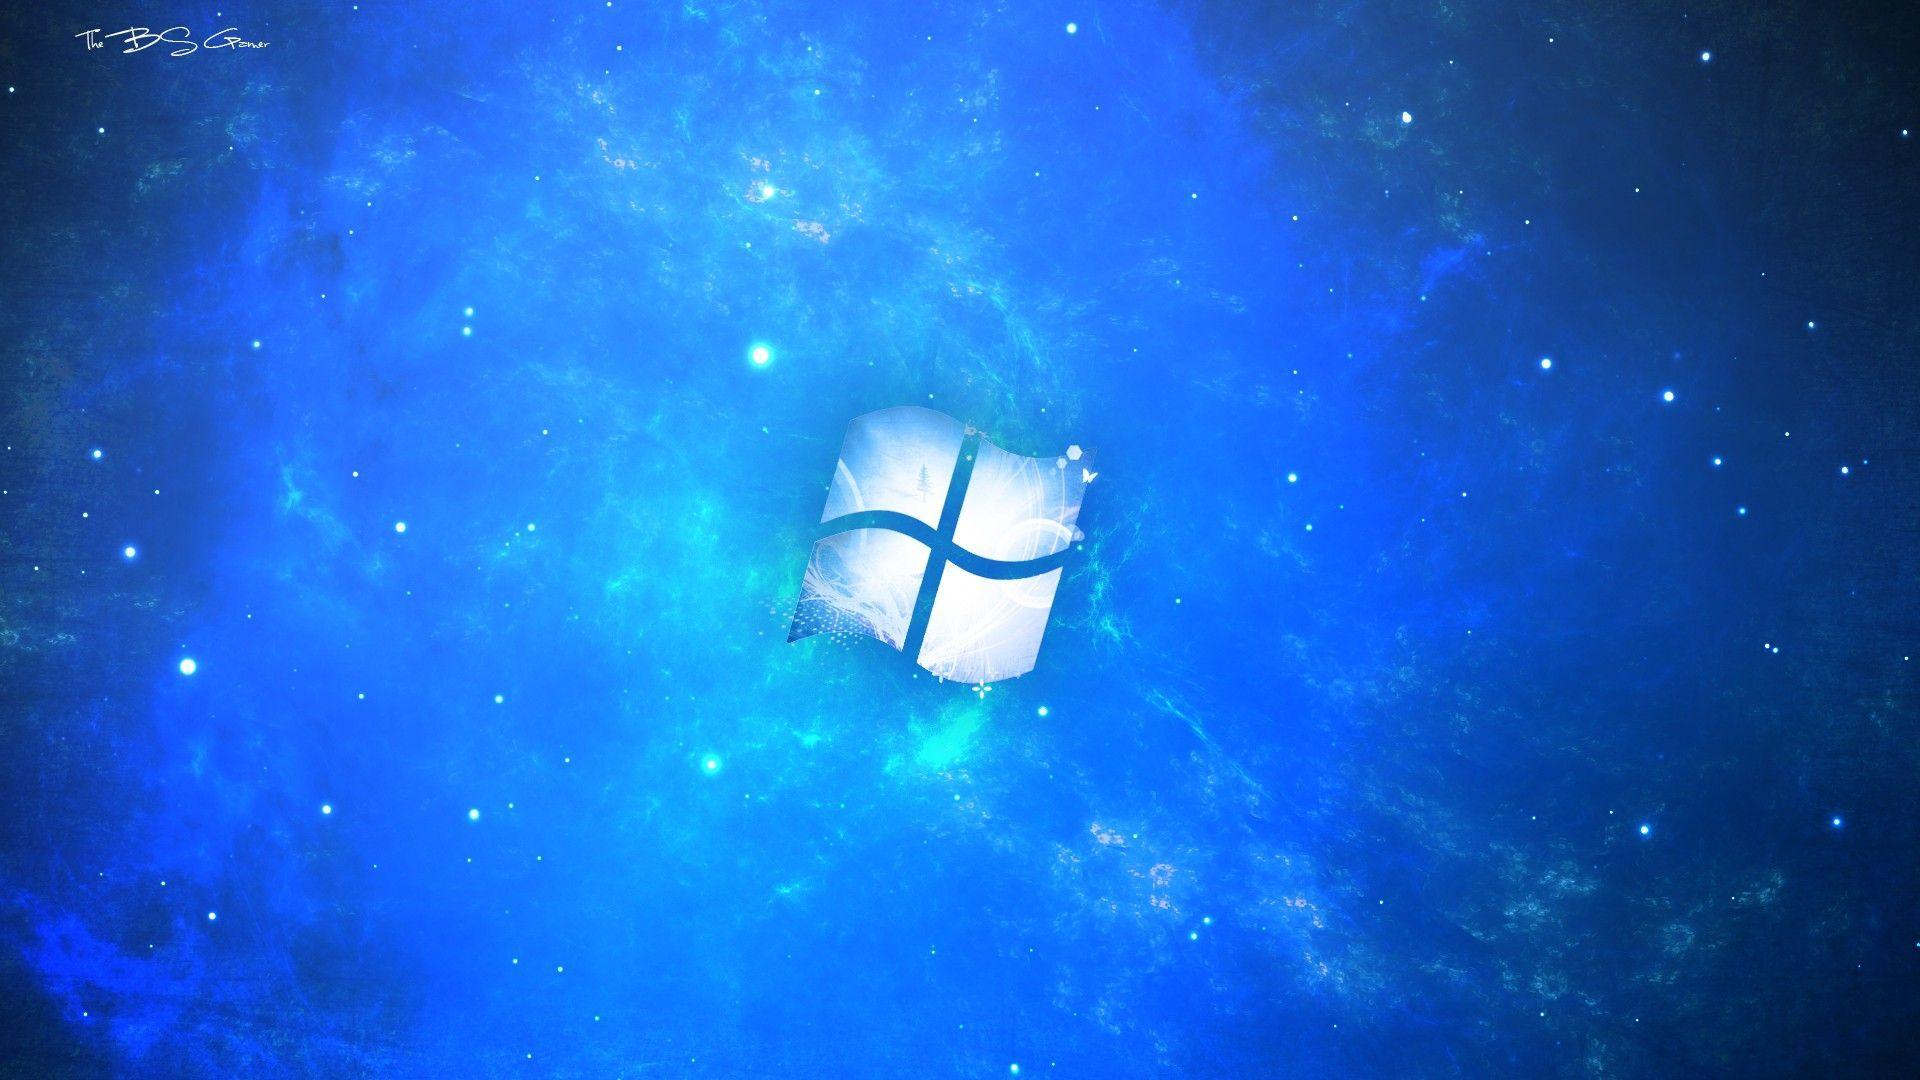 The Burning Blue Computers Wallpapers Windows 7 1920x1080